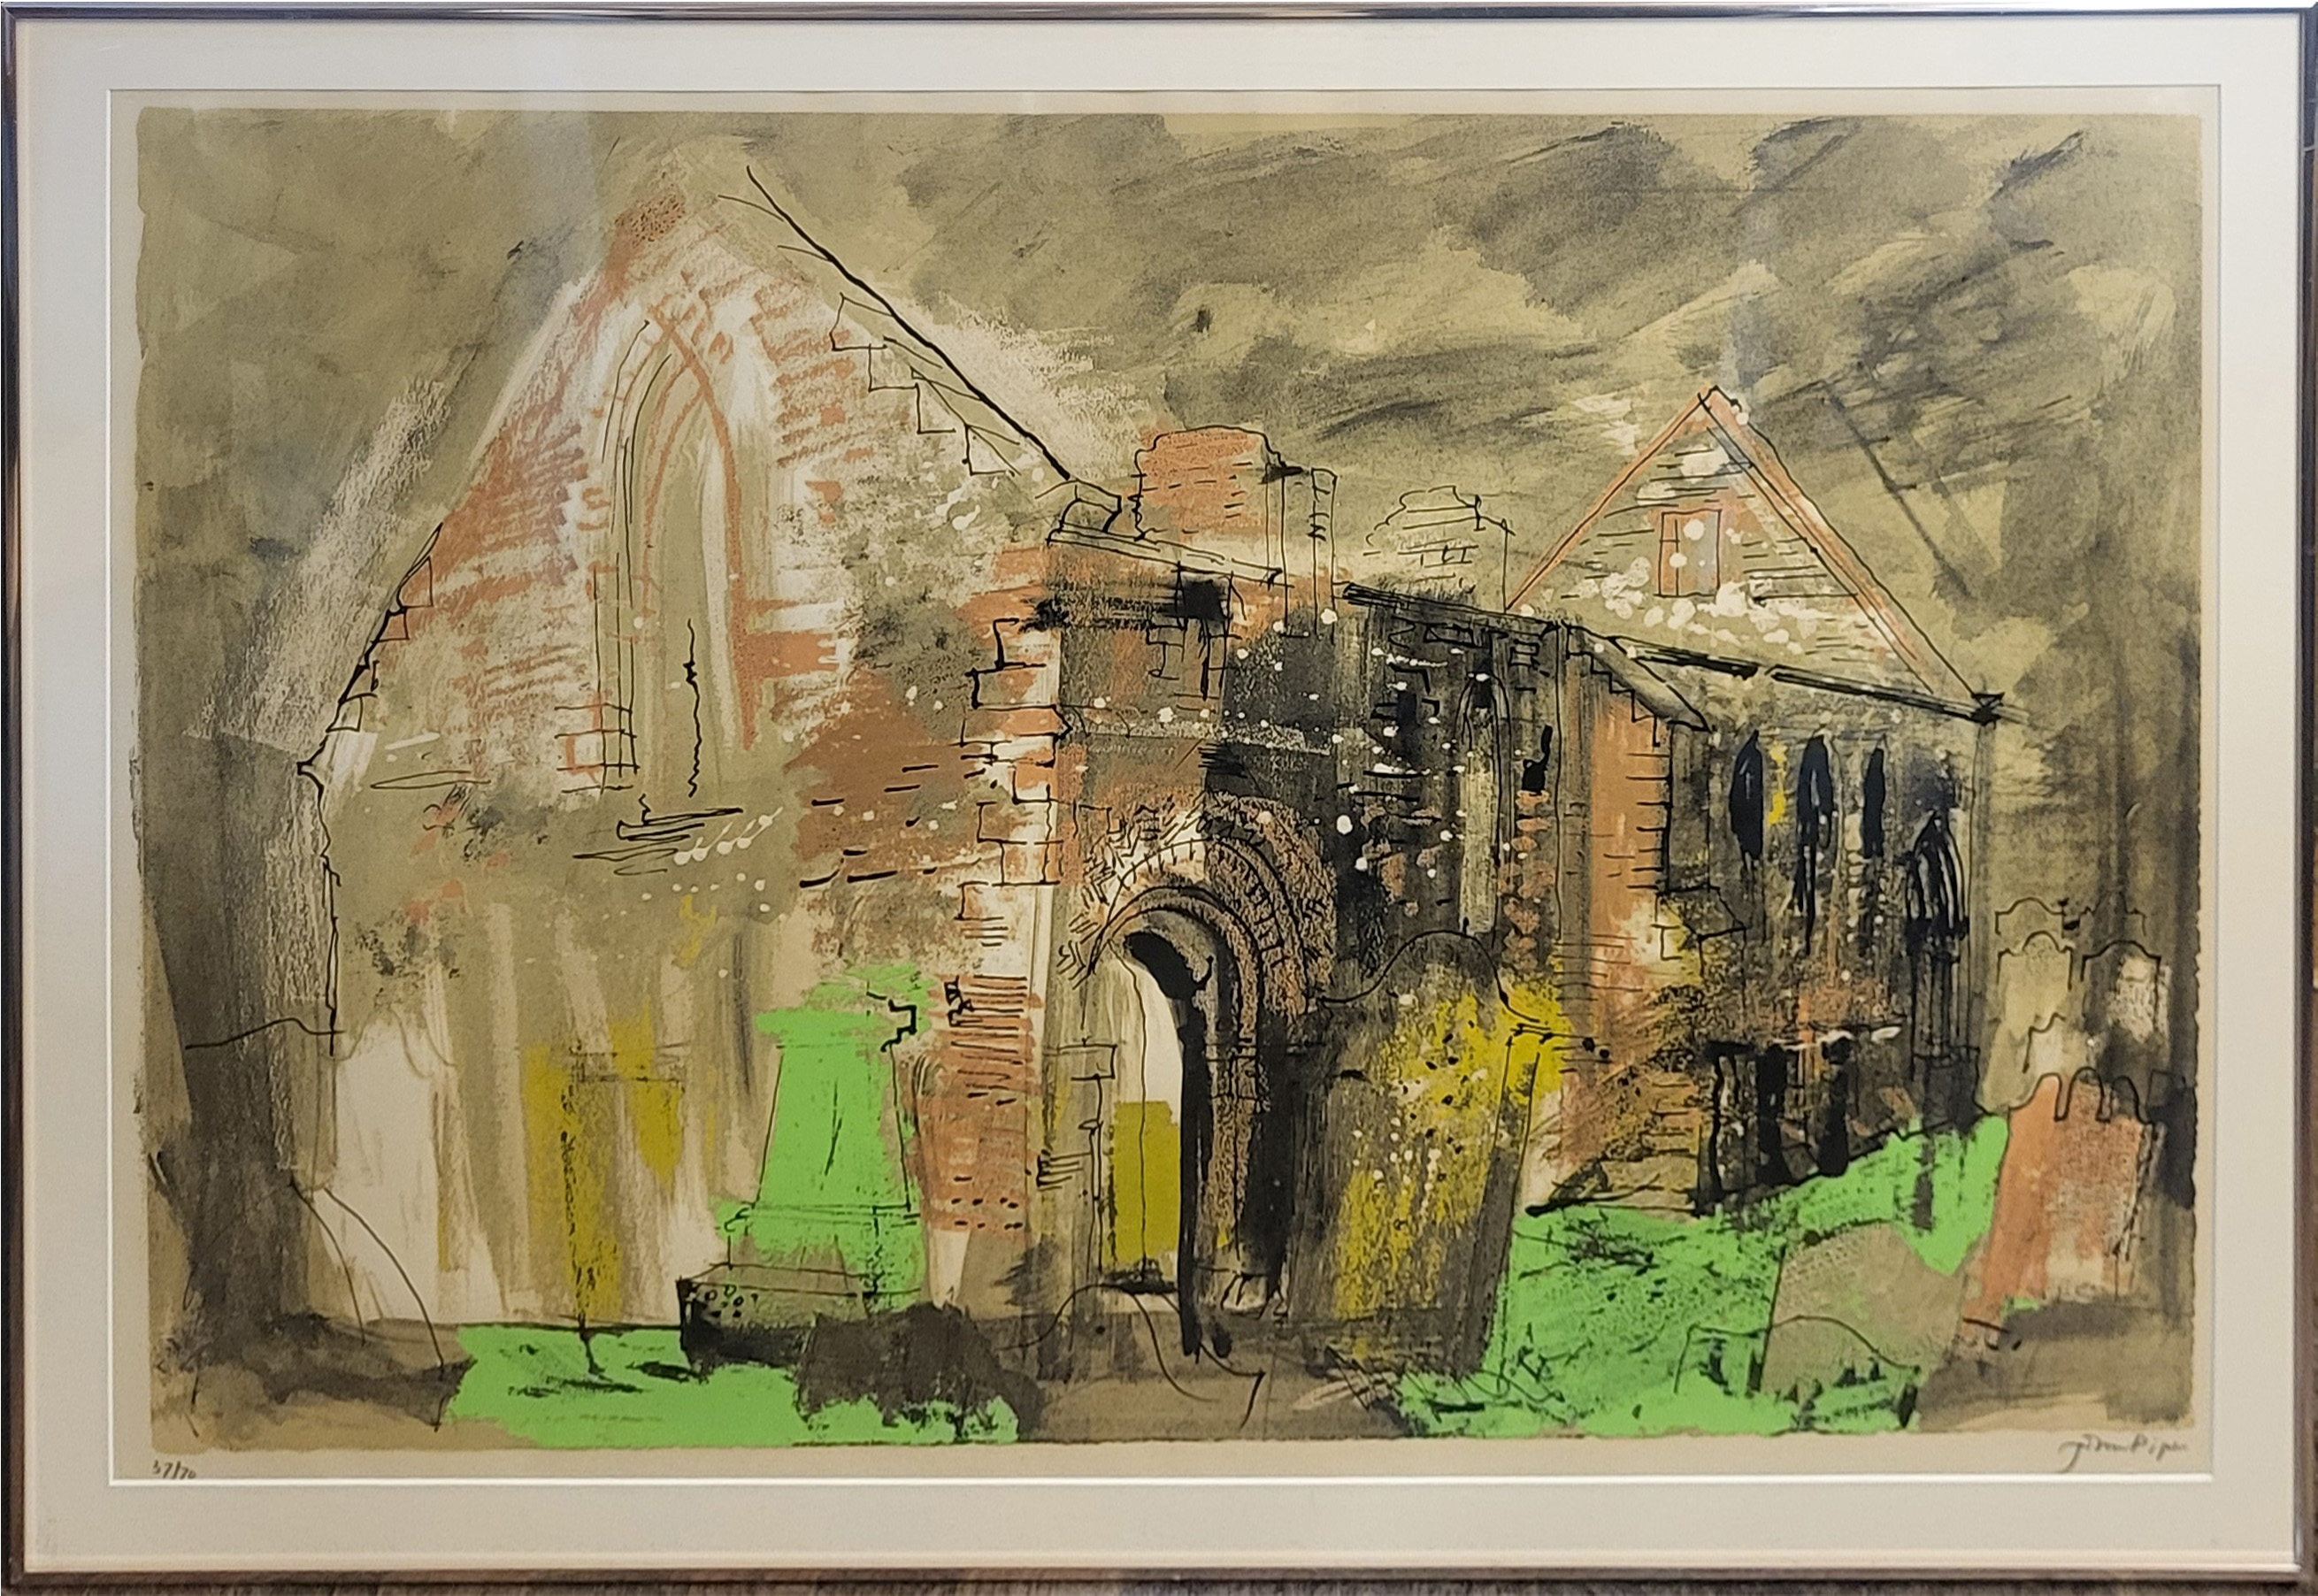 JOHN PIPER, ENGLISH, 1903 - 1992, LIMITED EDITION (37/70) SCREENPRINT IN COLOURS Titled: ‘Whithorn